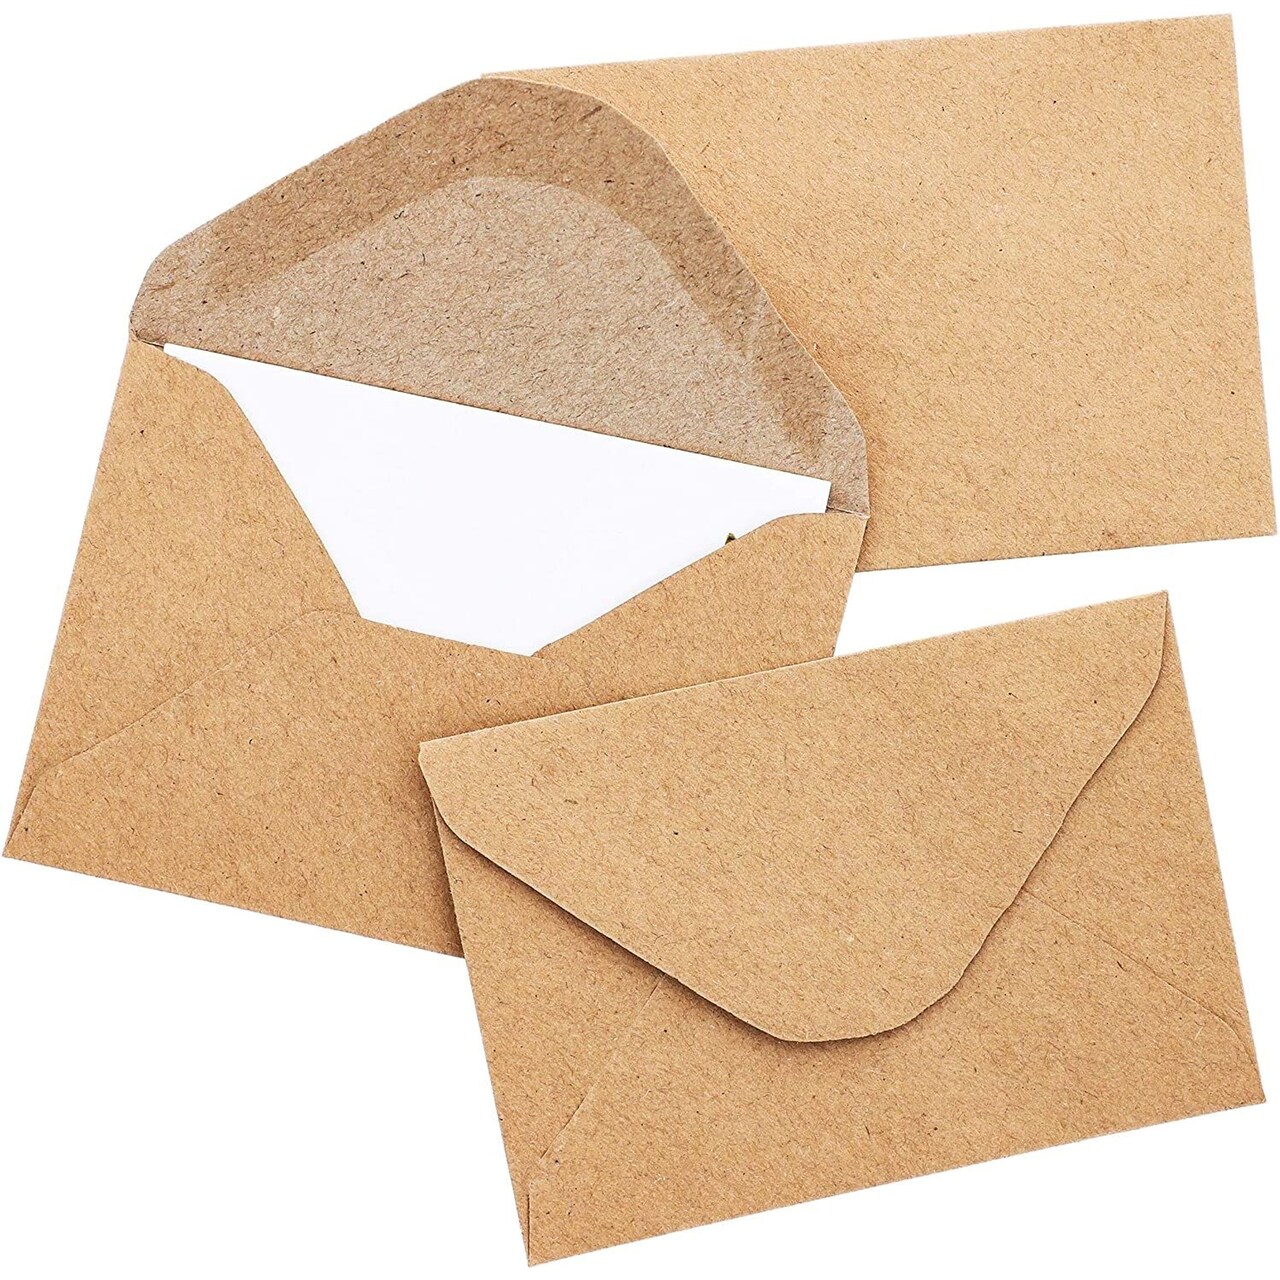 Juvale 100-Count Gift Card Envelopes, Brown Kraft Mini Small Envelope for  Business Cards, Small Note Cards, 4.1 x 2.75 Inches